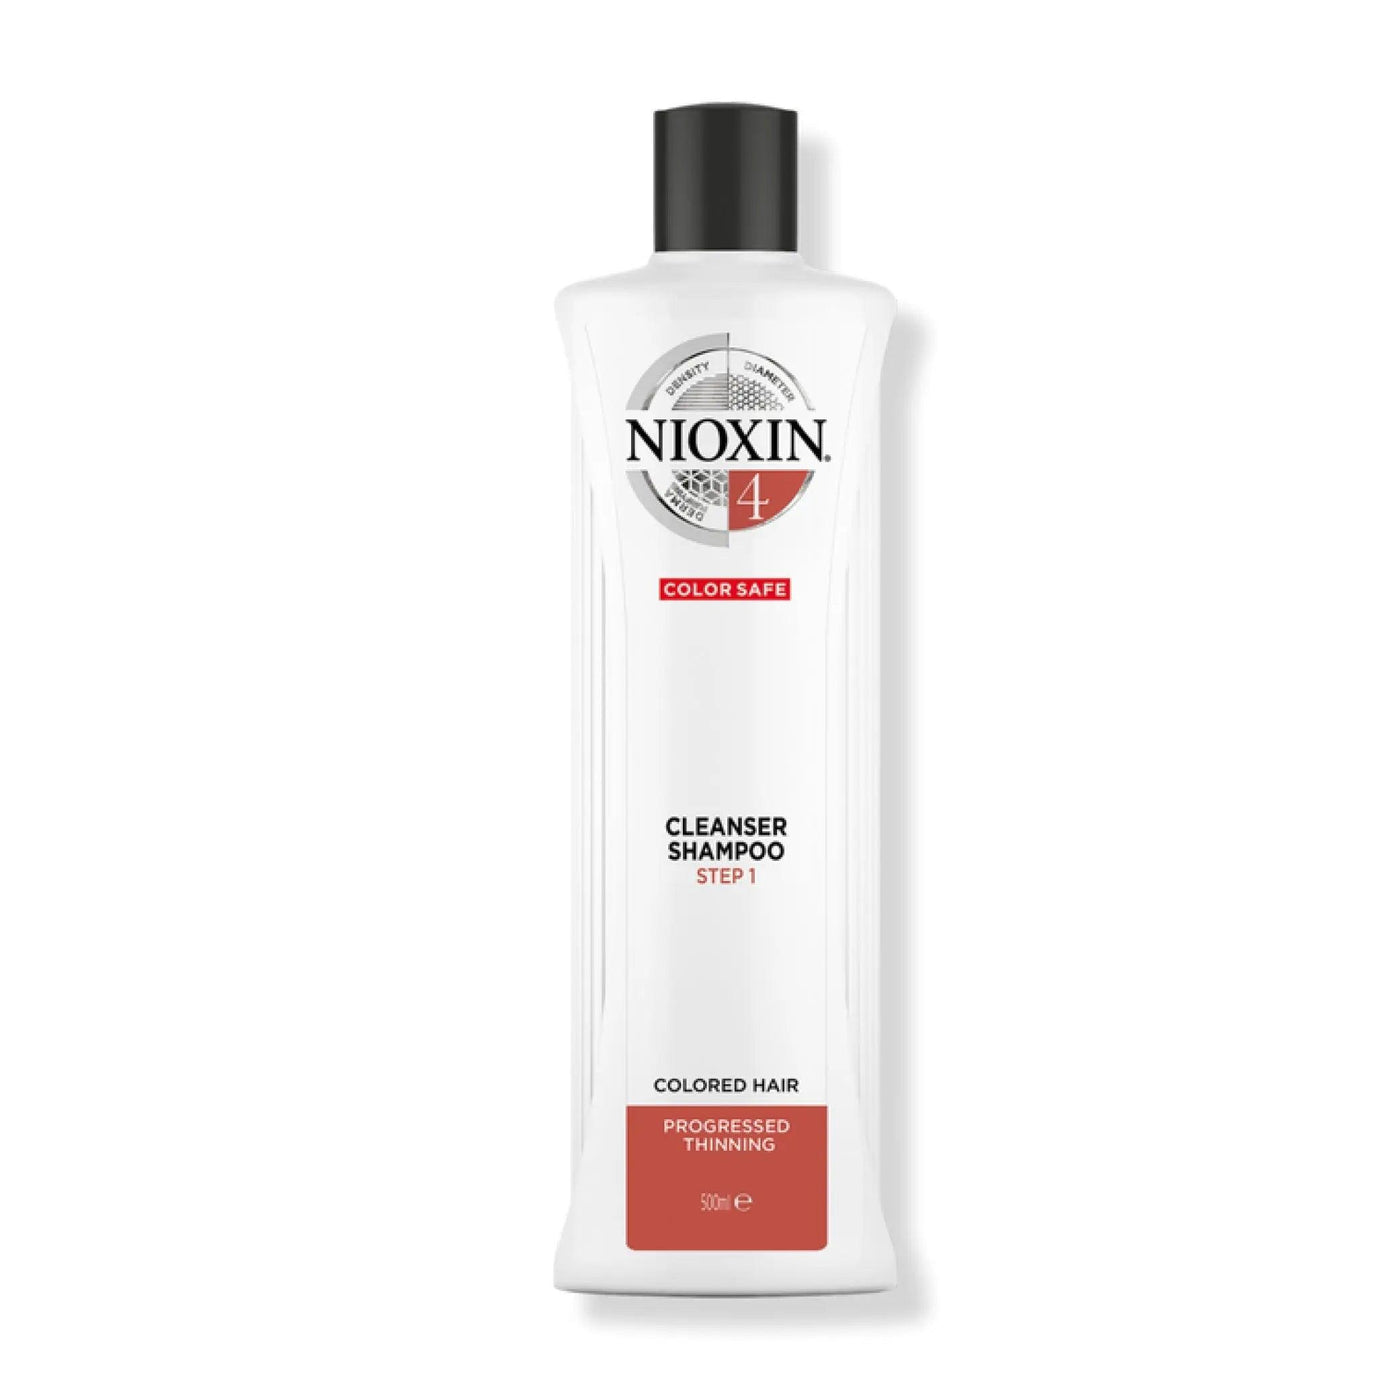 System 4 Cleanser Shampoo Nioxin Boutique Deauville